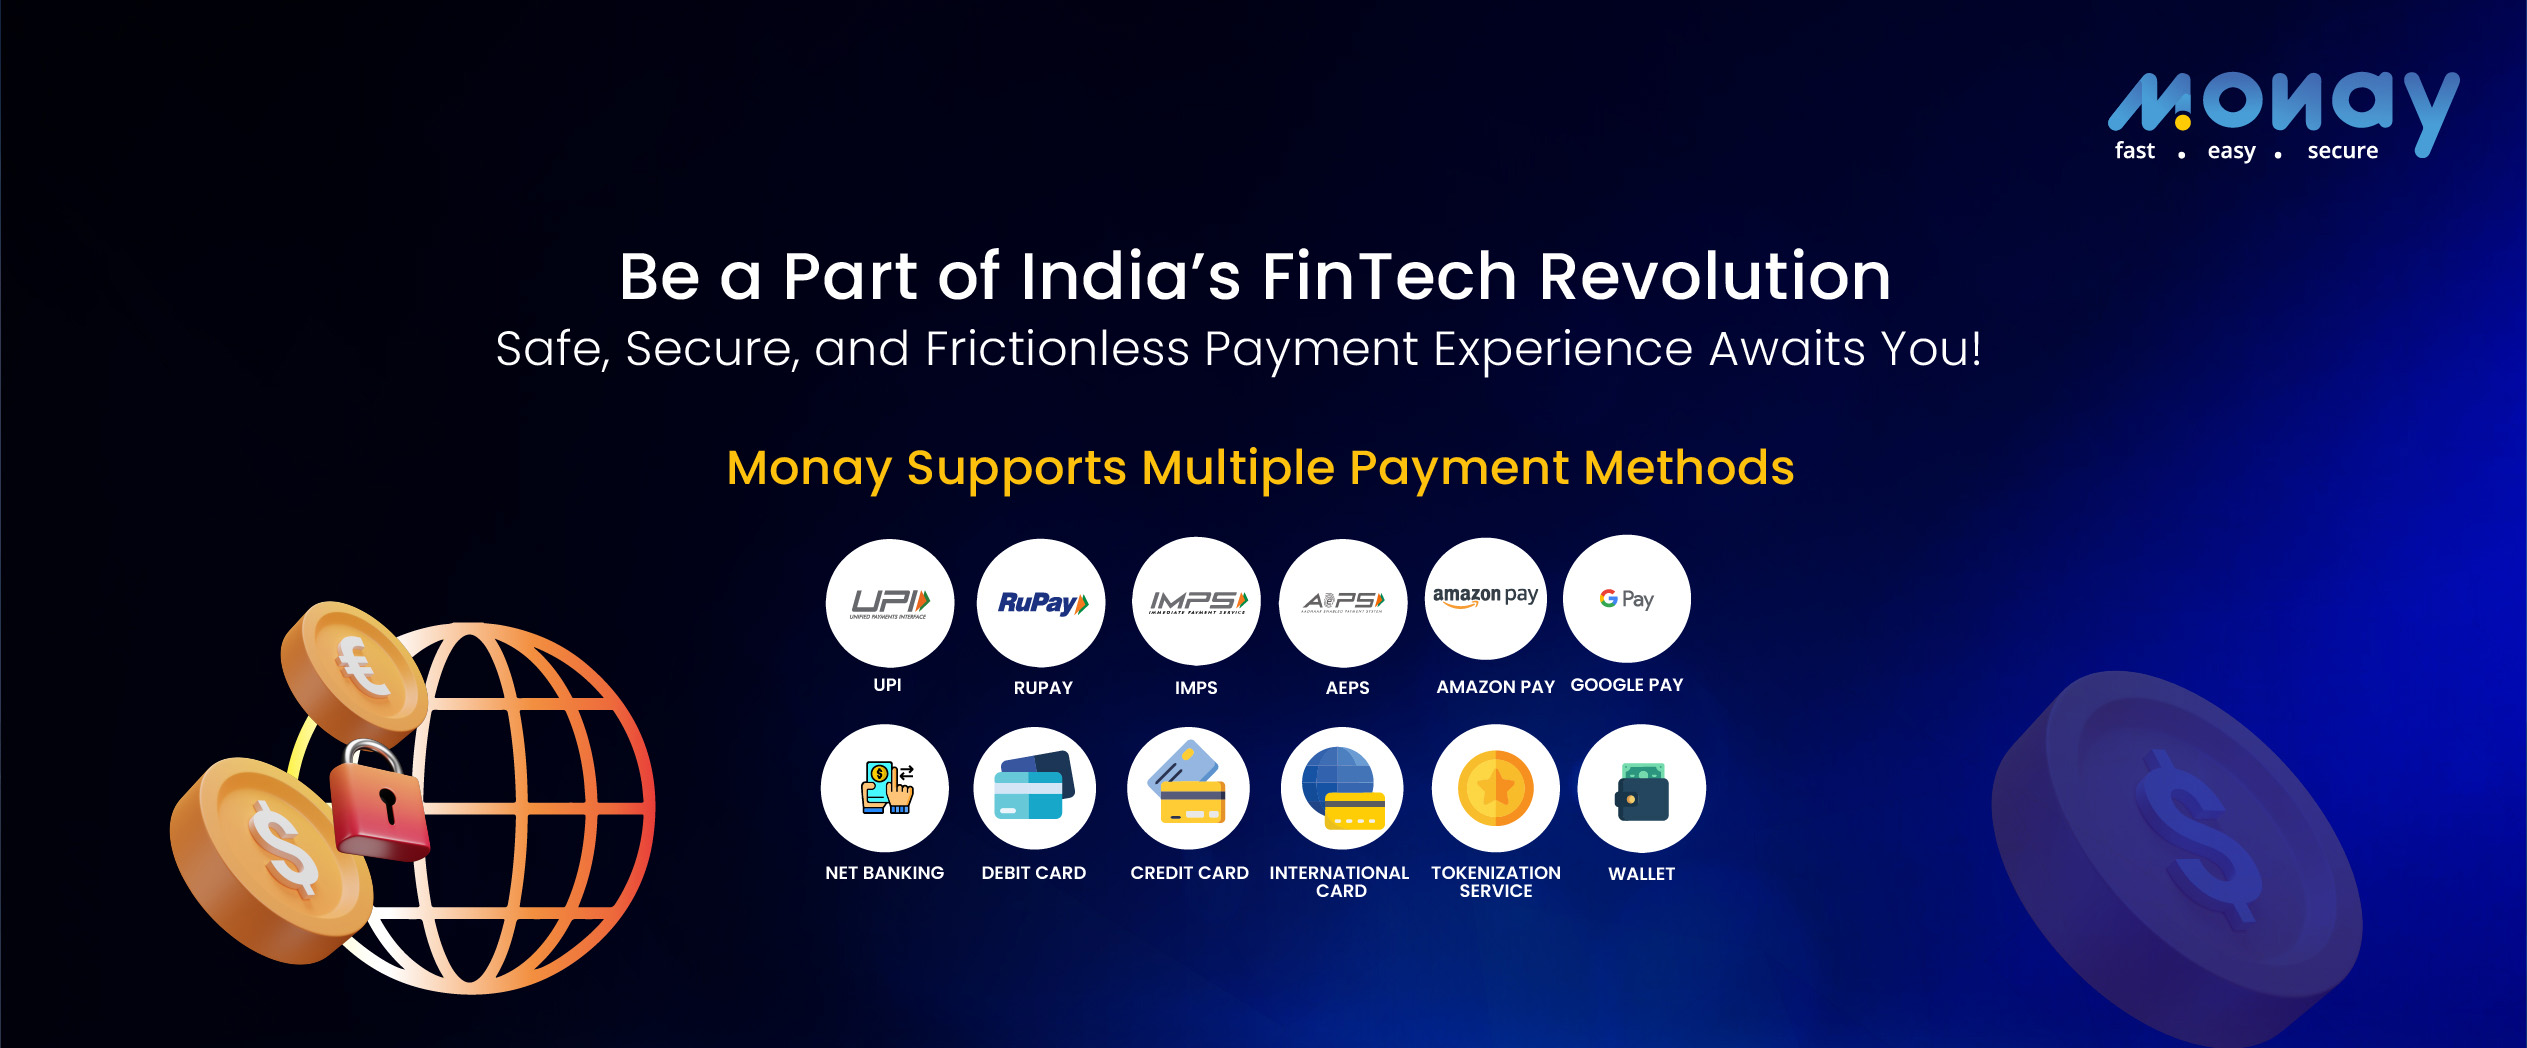 Be a Part of India's FinTech Revolution - Monay Payments Tilli' Product